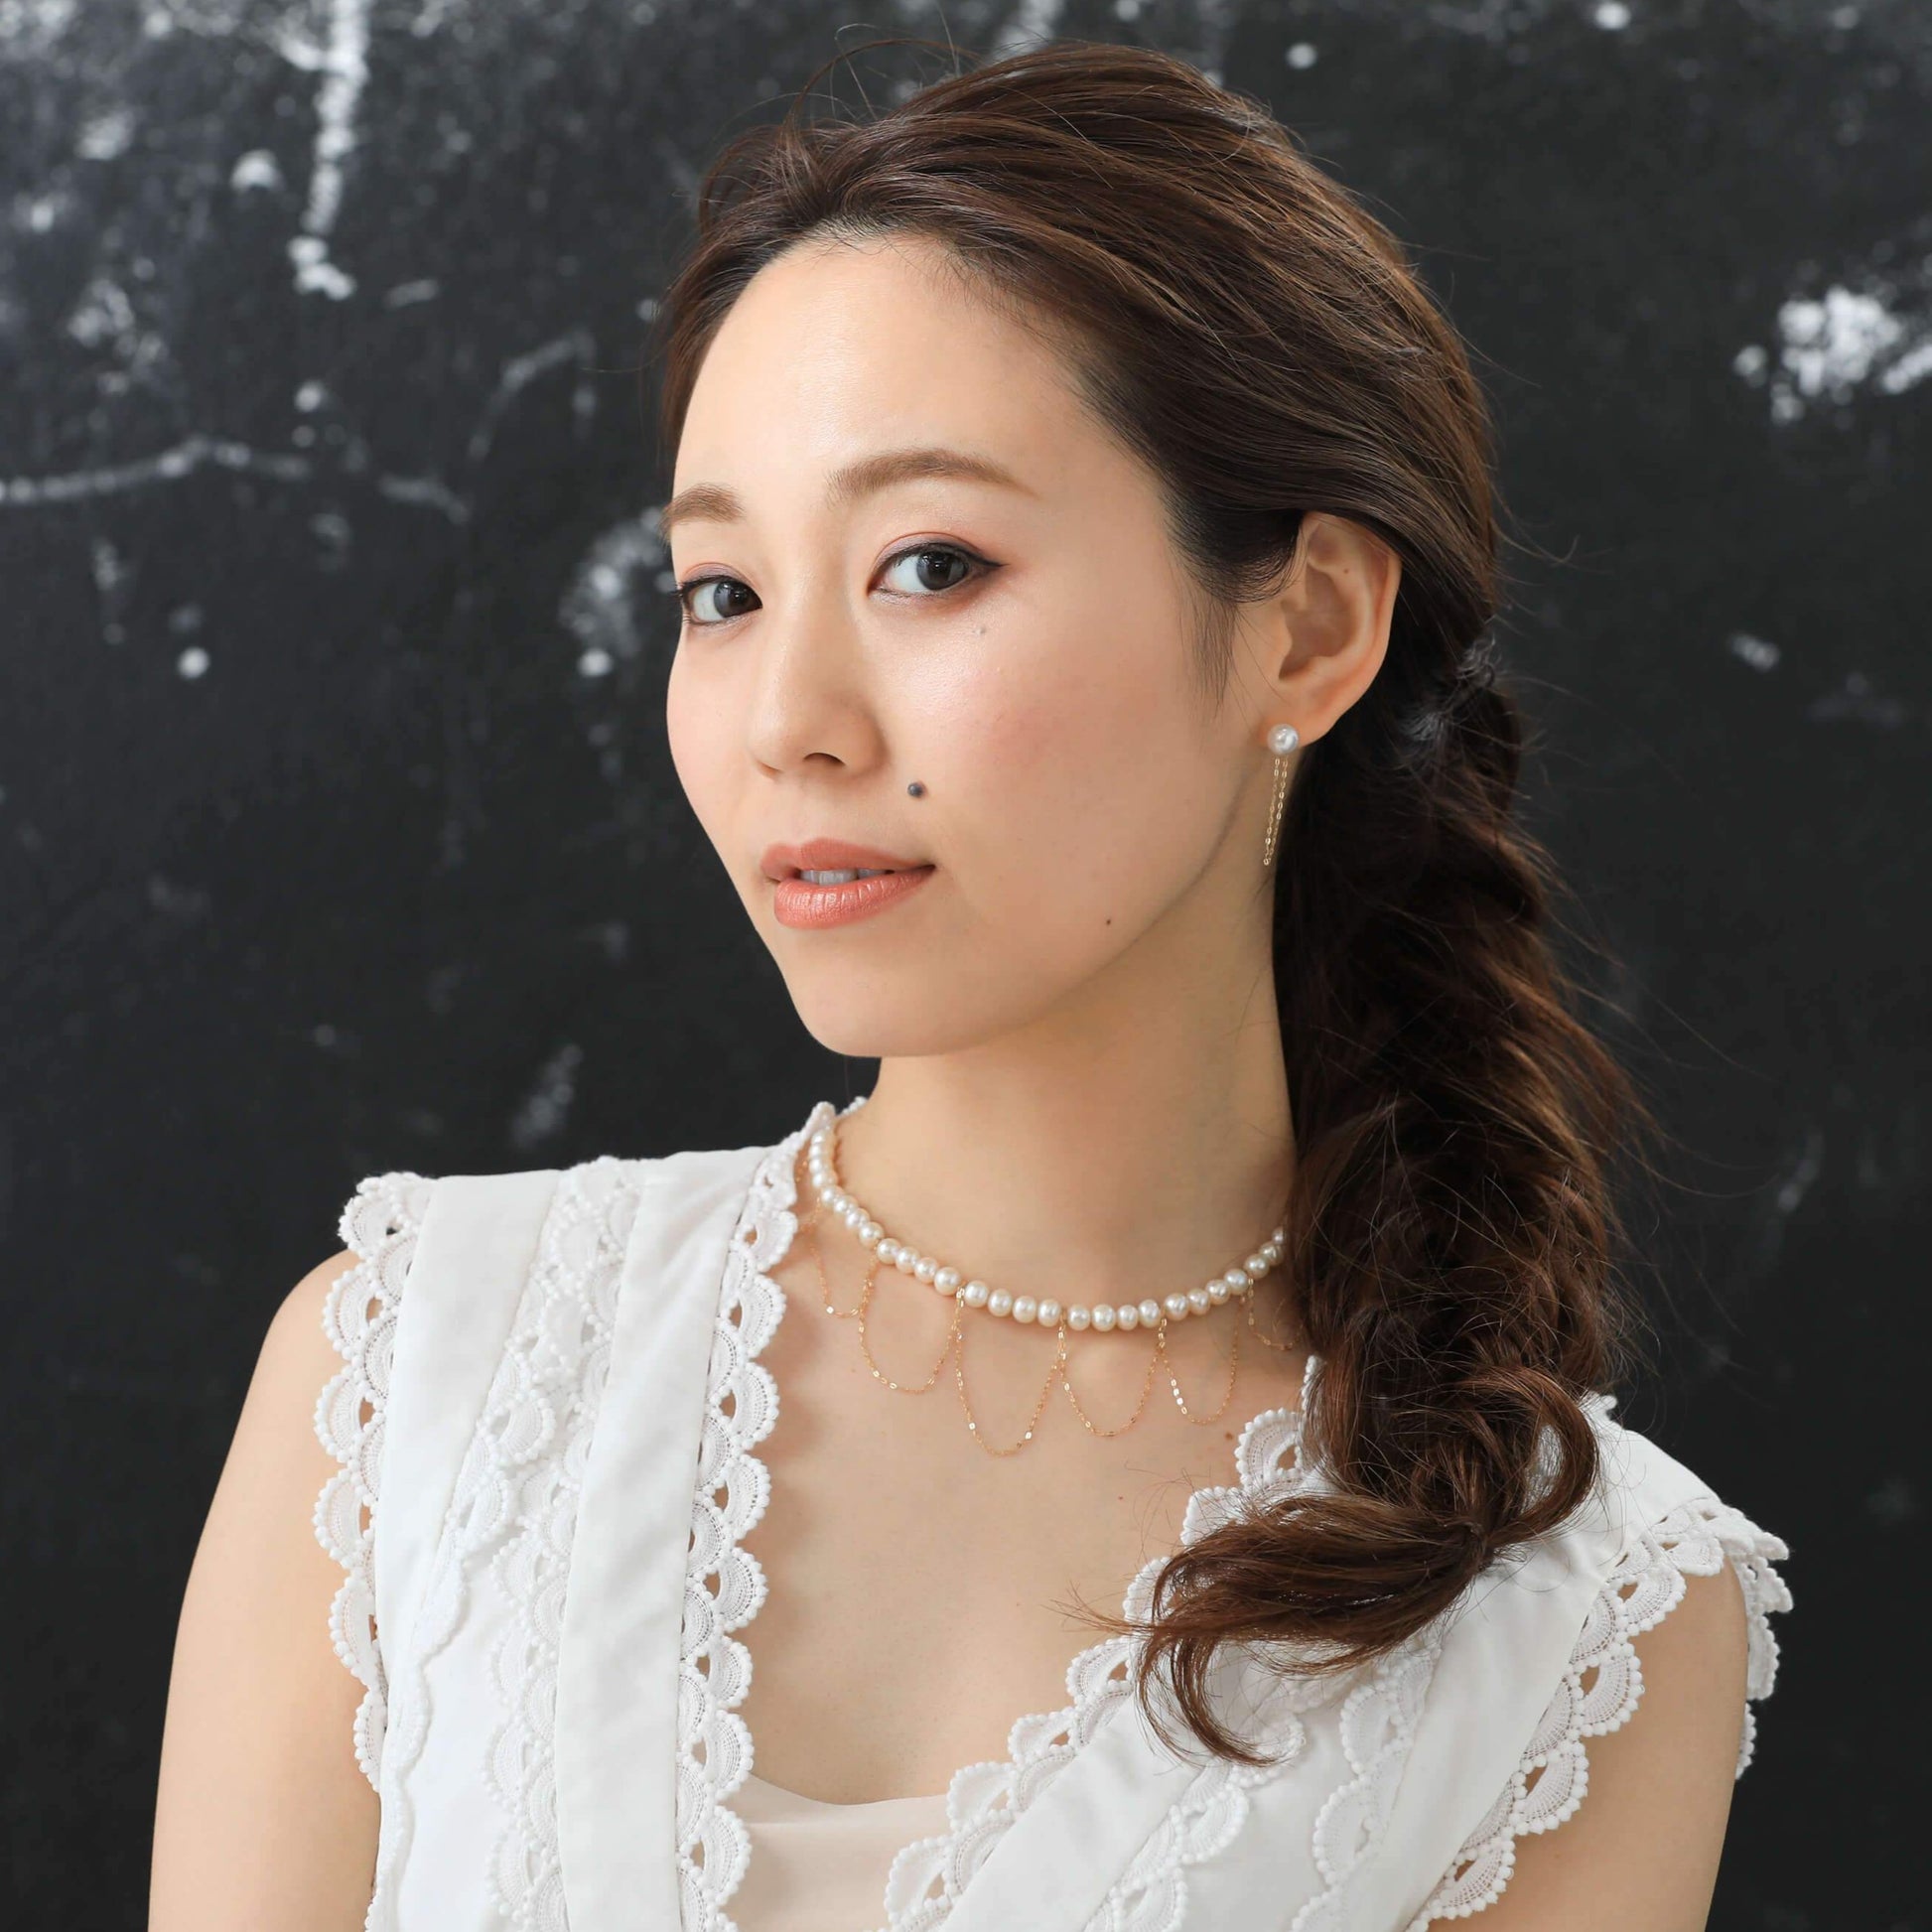 Elegant woman in white dress with draped gold and pearl necklace.